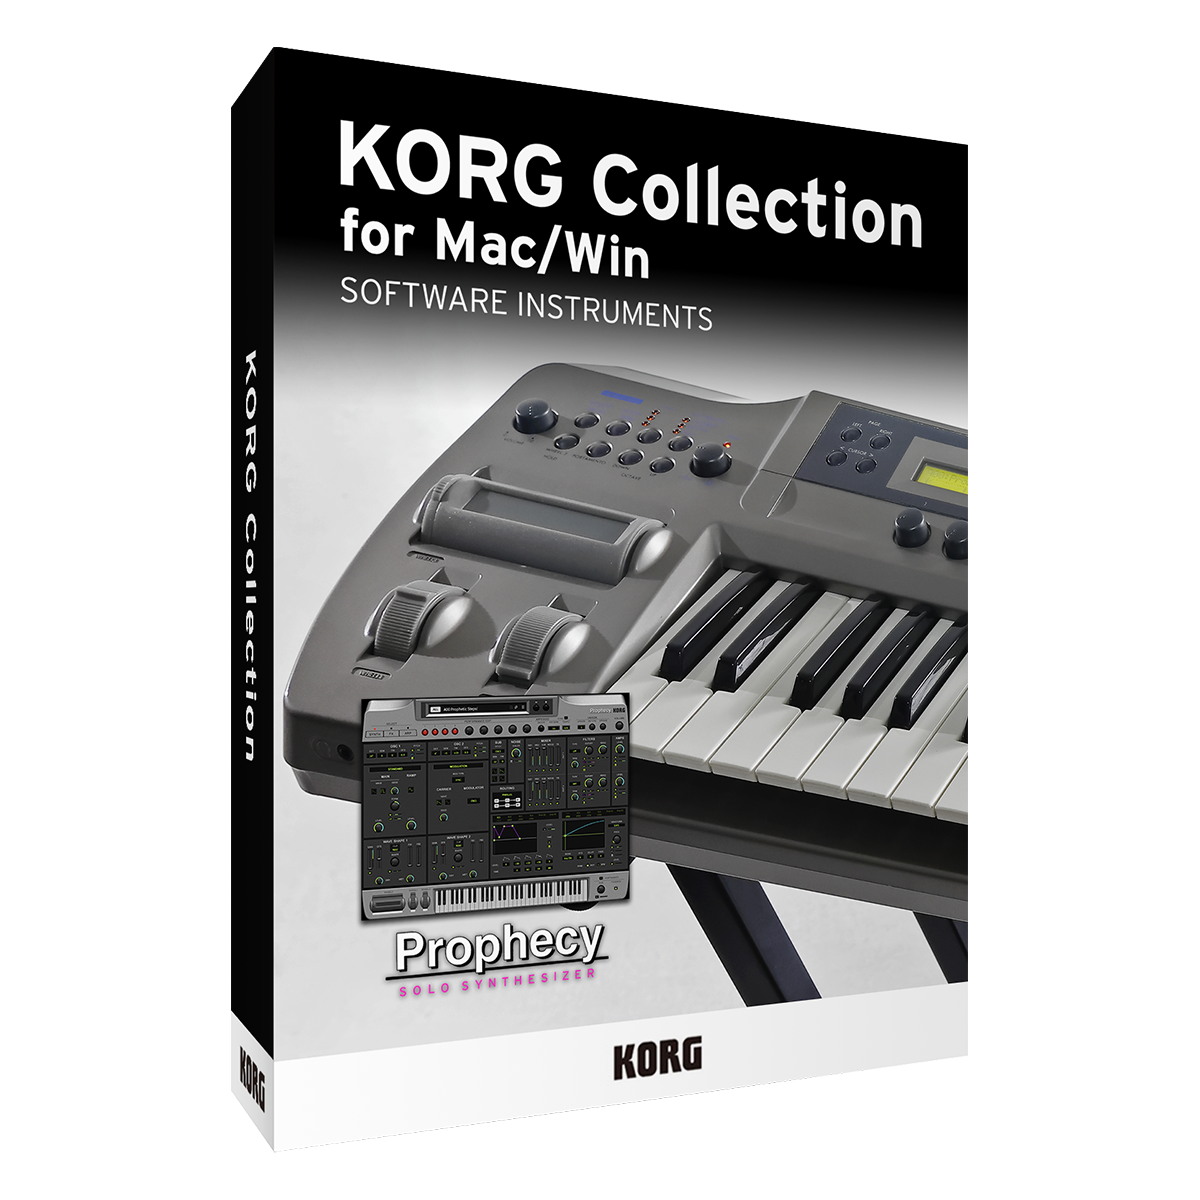 KORG Collection 3 - Prophecy